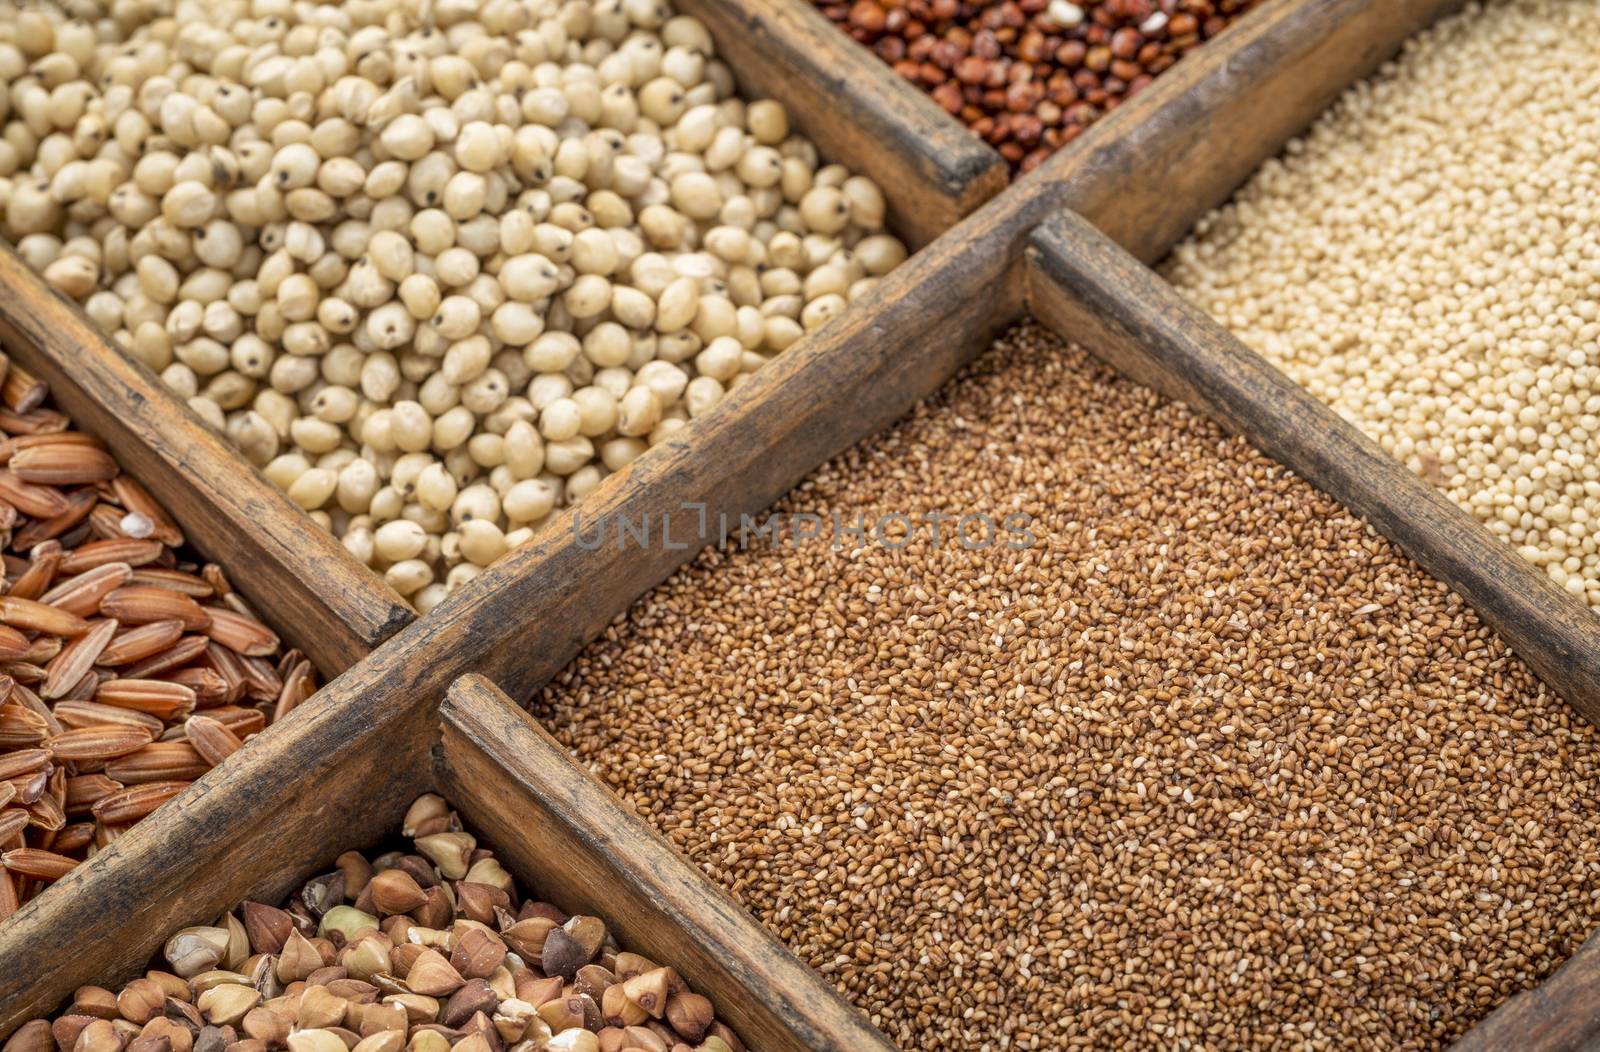 teff and other gluten free grains in a wooden rustic box